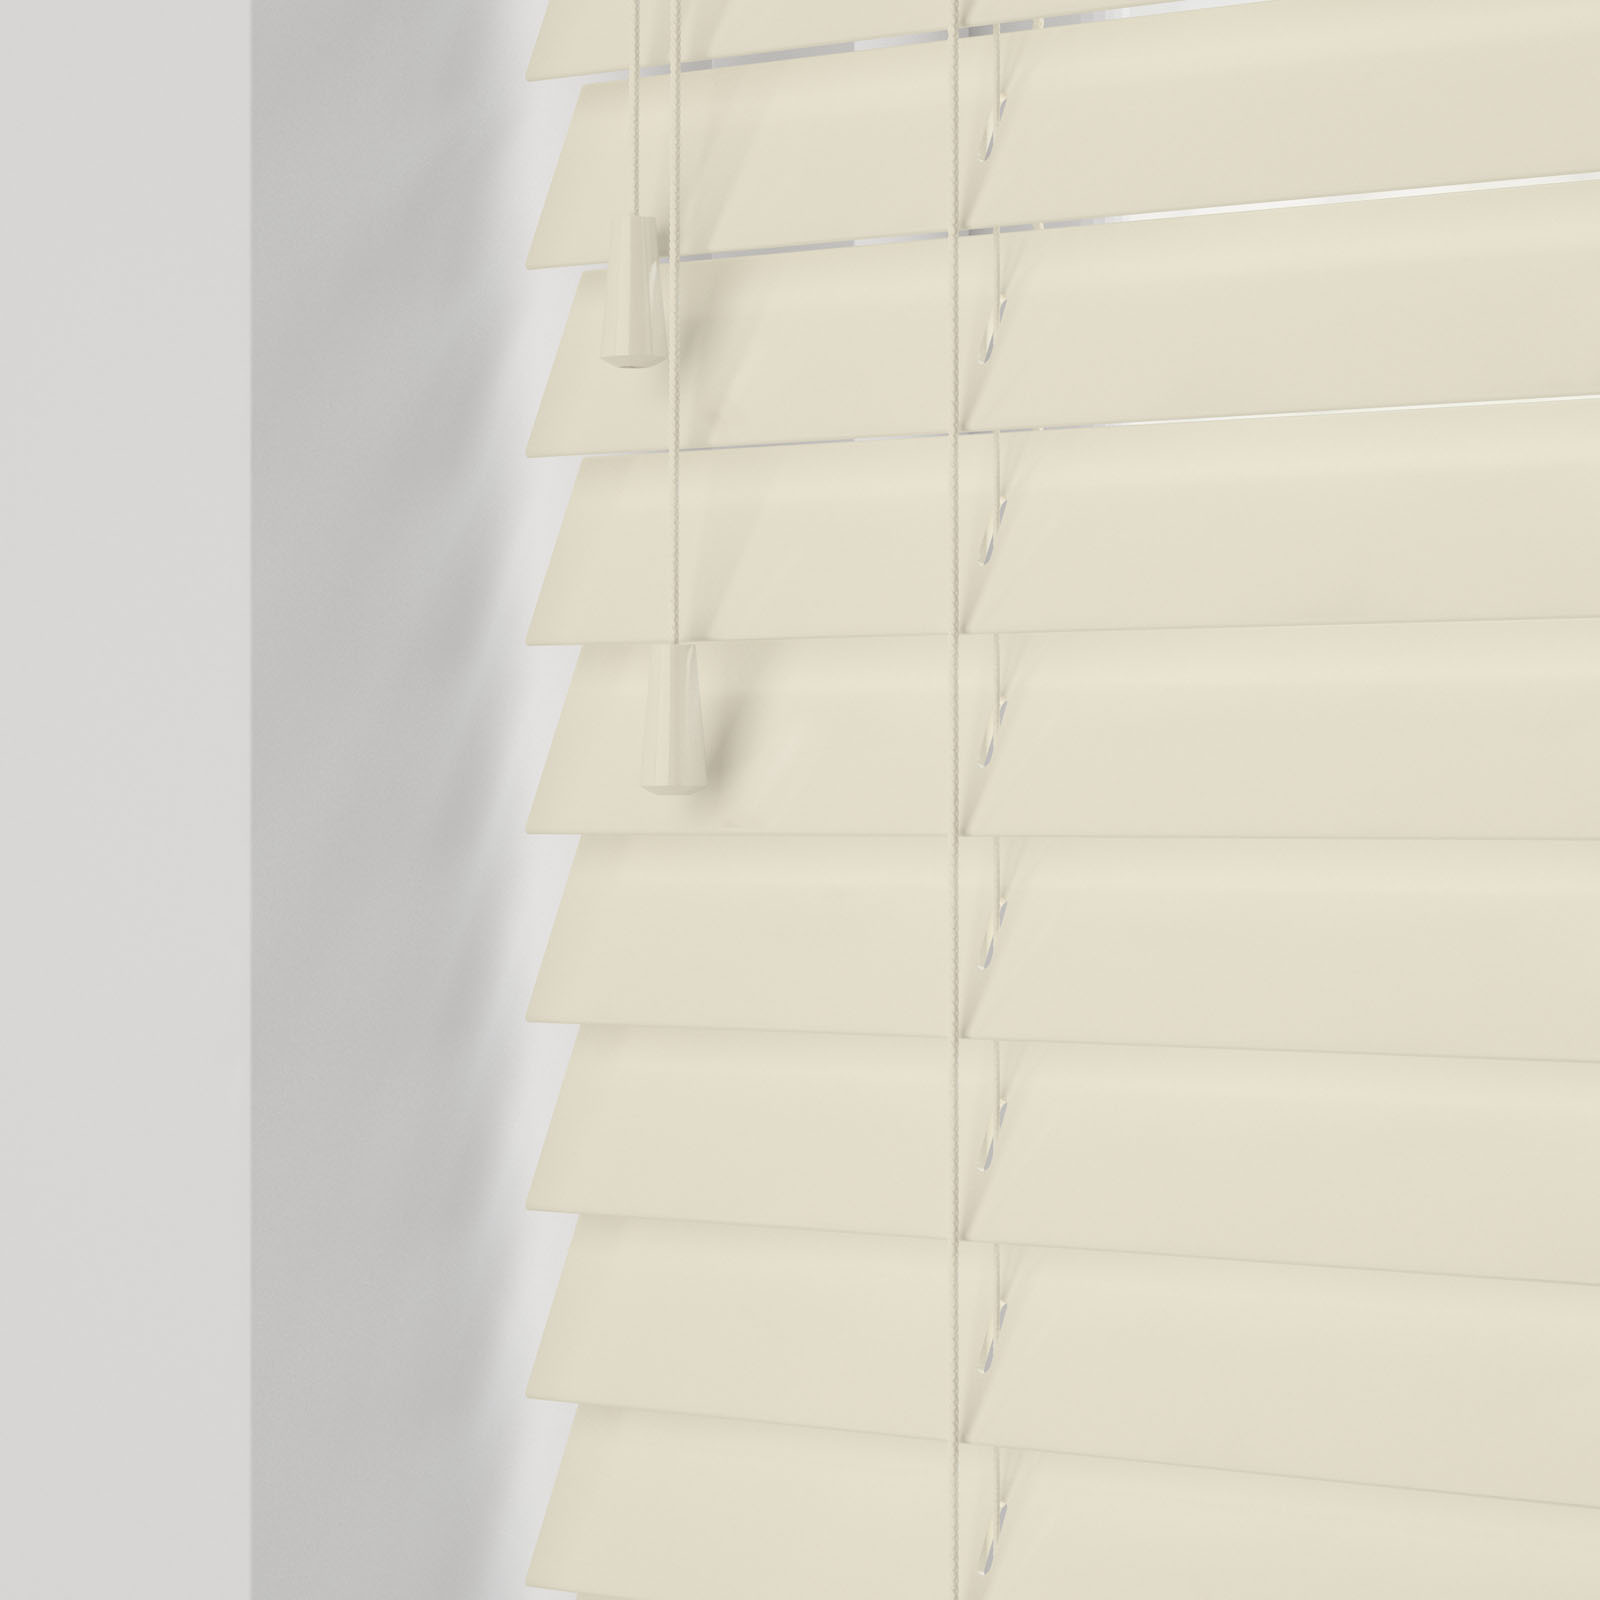 UK Suppliers of Venetian Blinds With Cord Or Tape Options